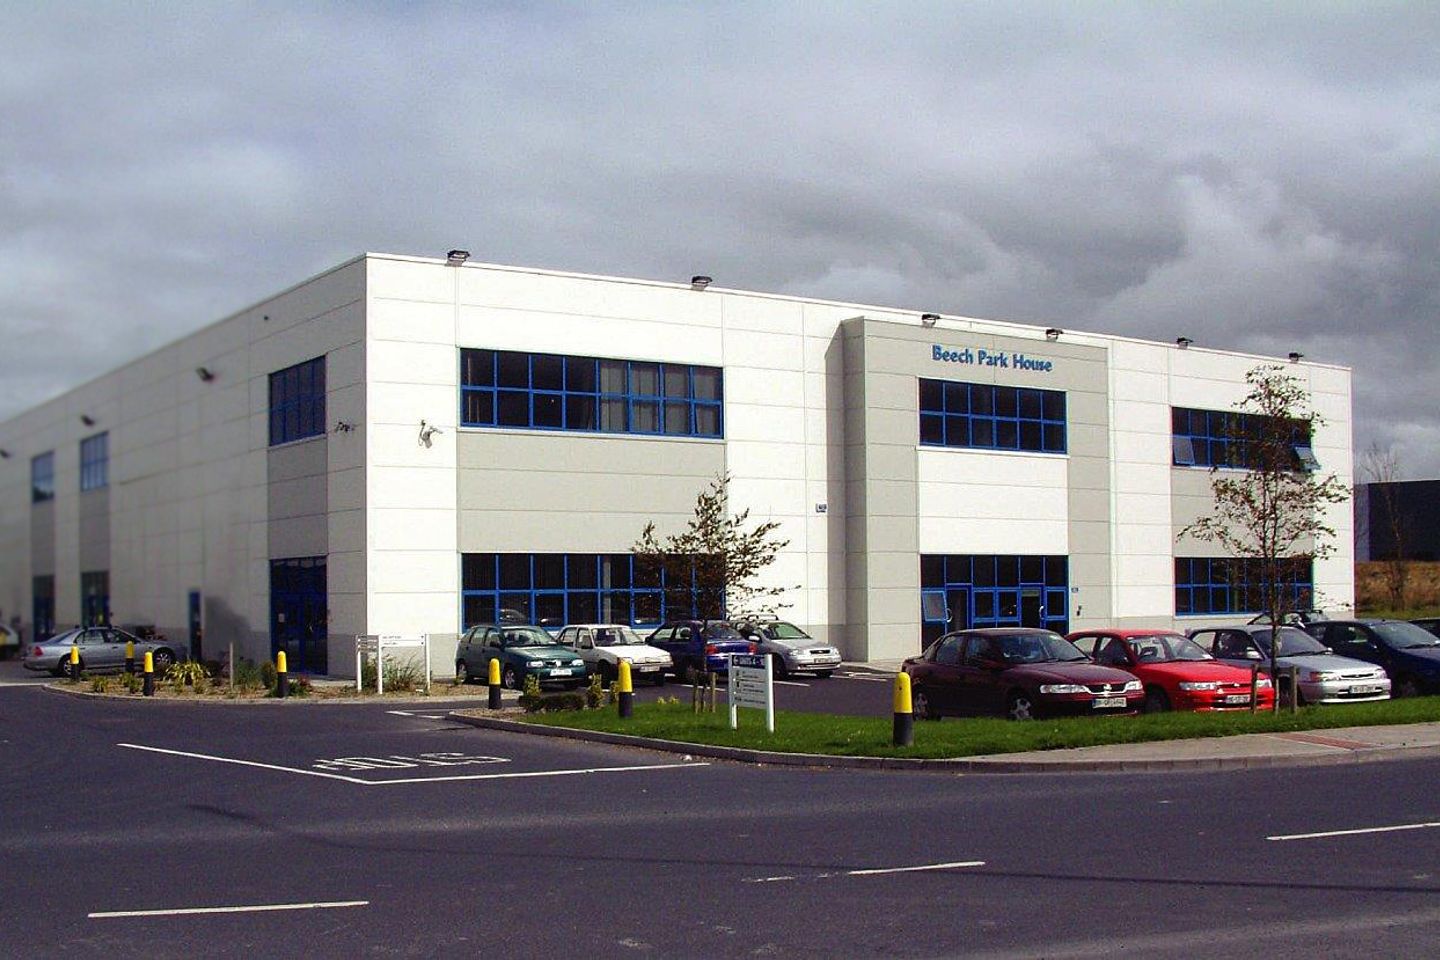 Beechpark Business Centre, Beech Park House, Smithstown, Shannon, Co. Clare